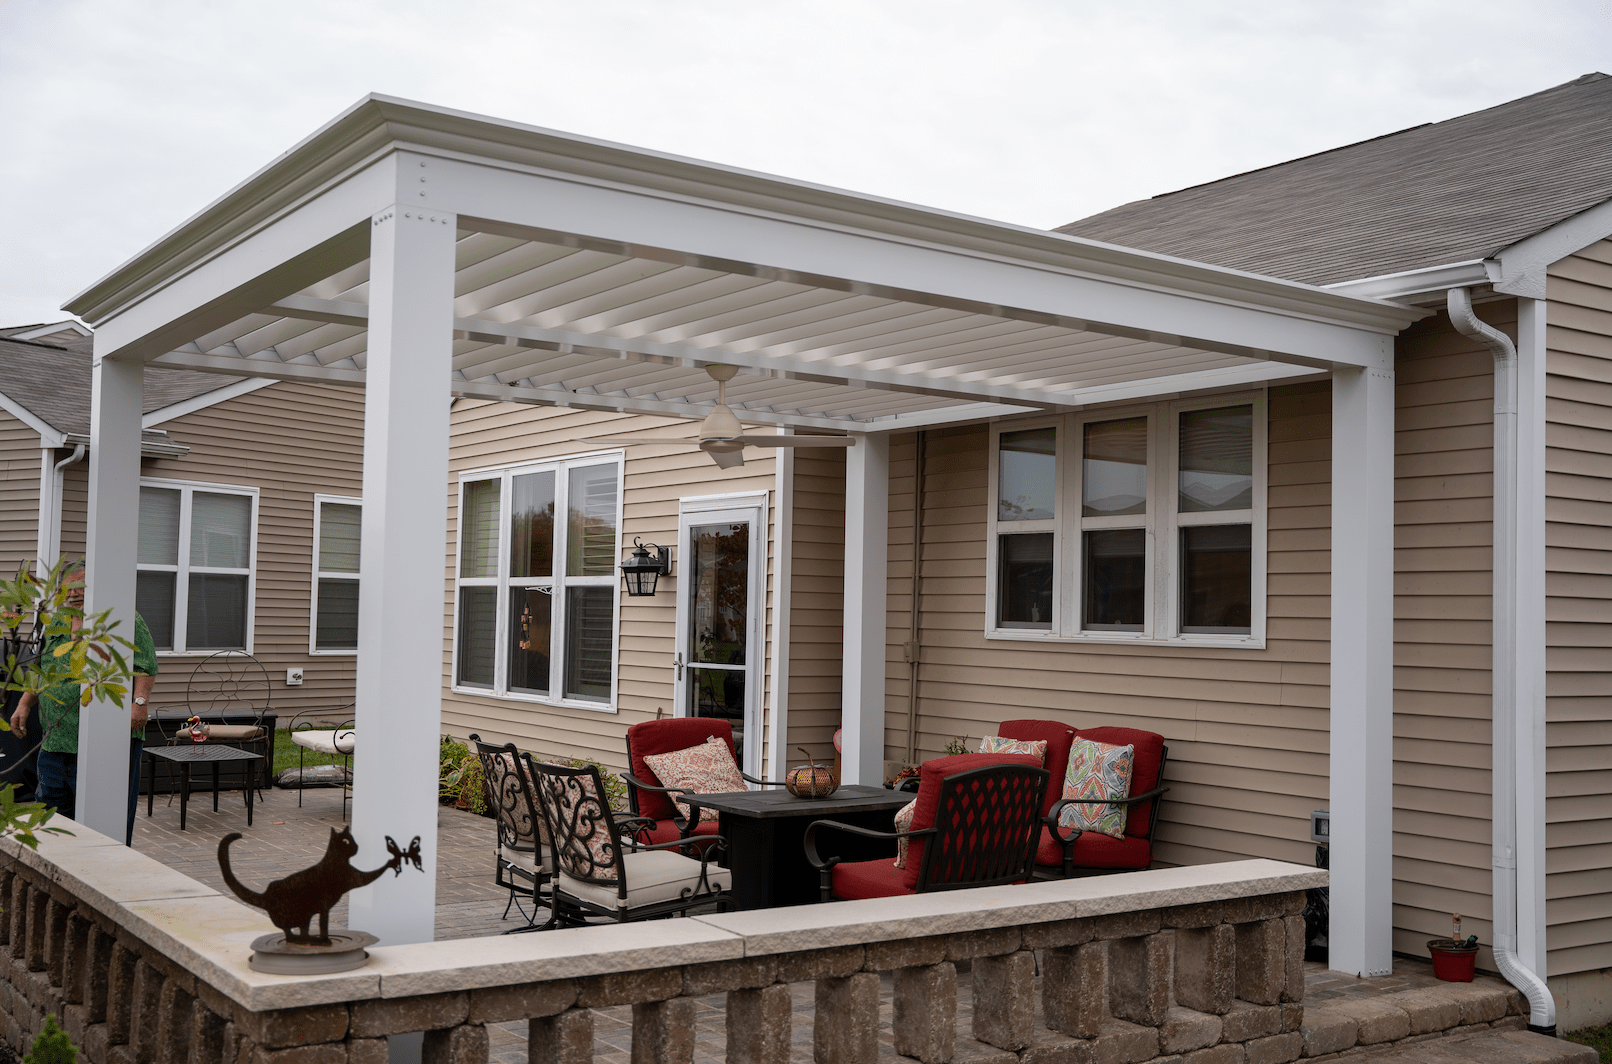 pergola install near roof of house on patio deck space